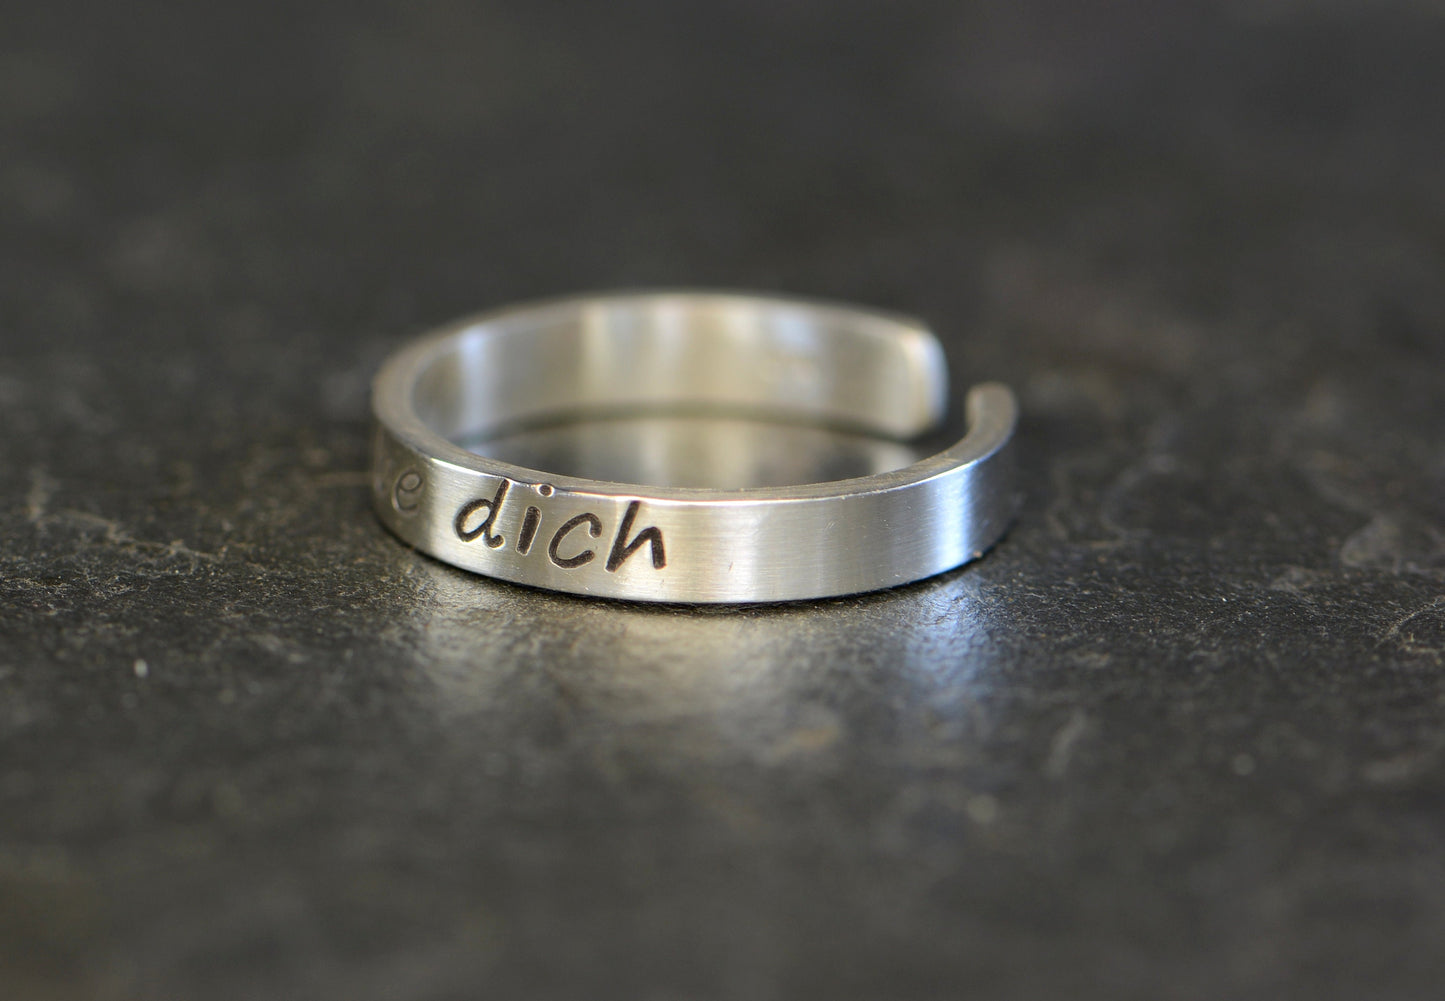 Ich liebe Dich Sterling Silver Toe Ring engineered with German Precision